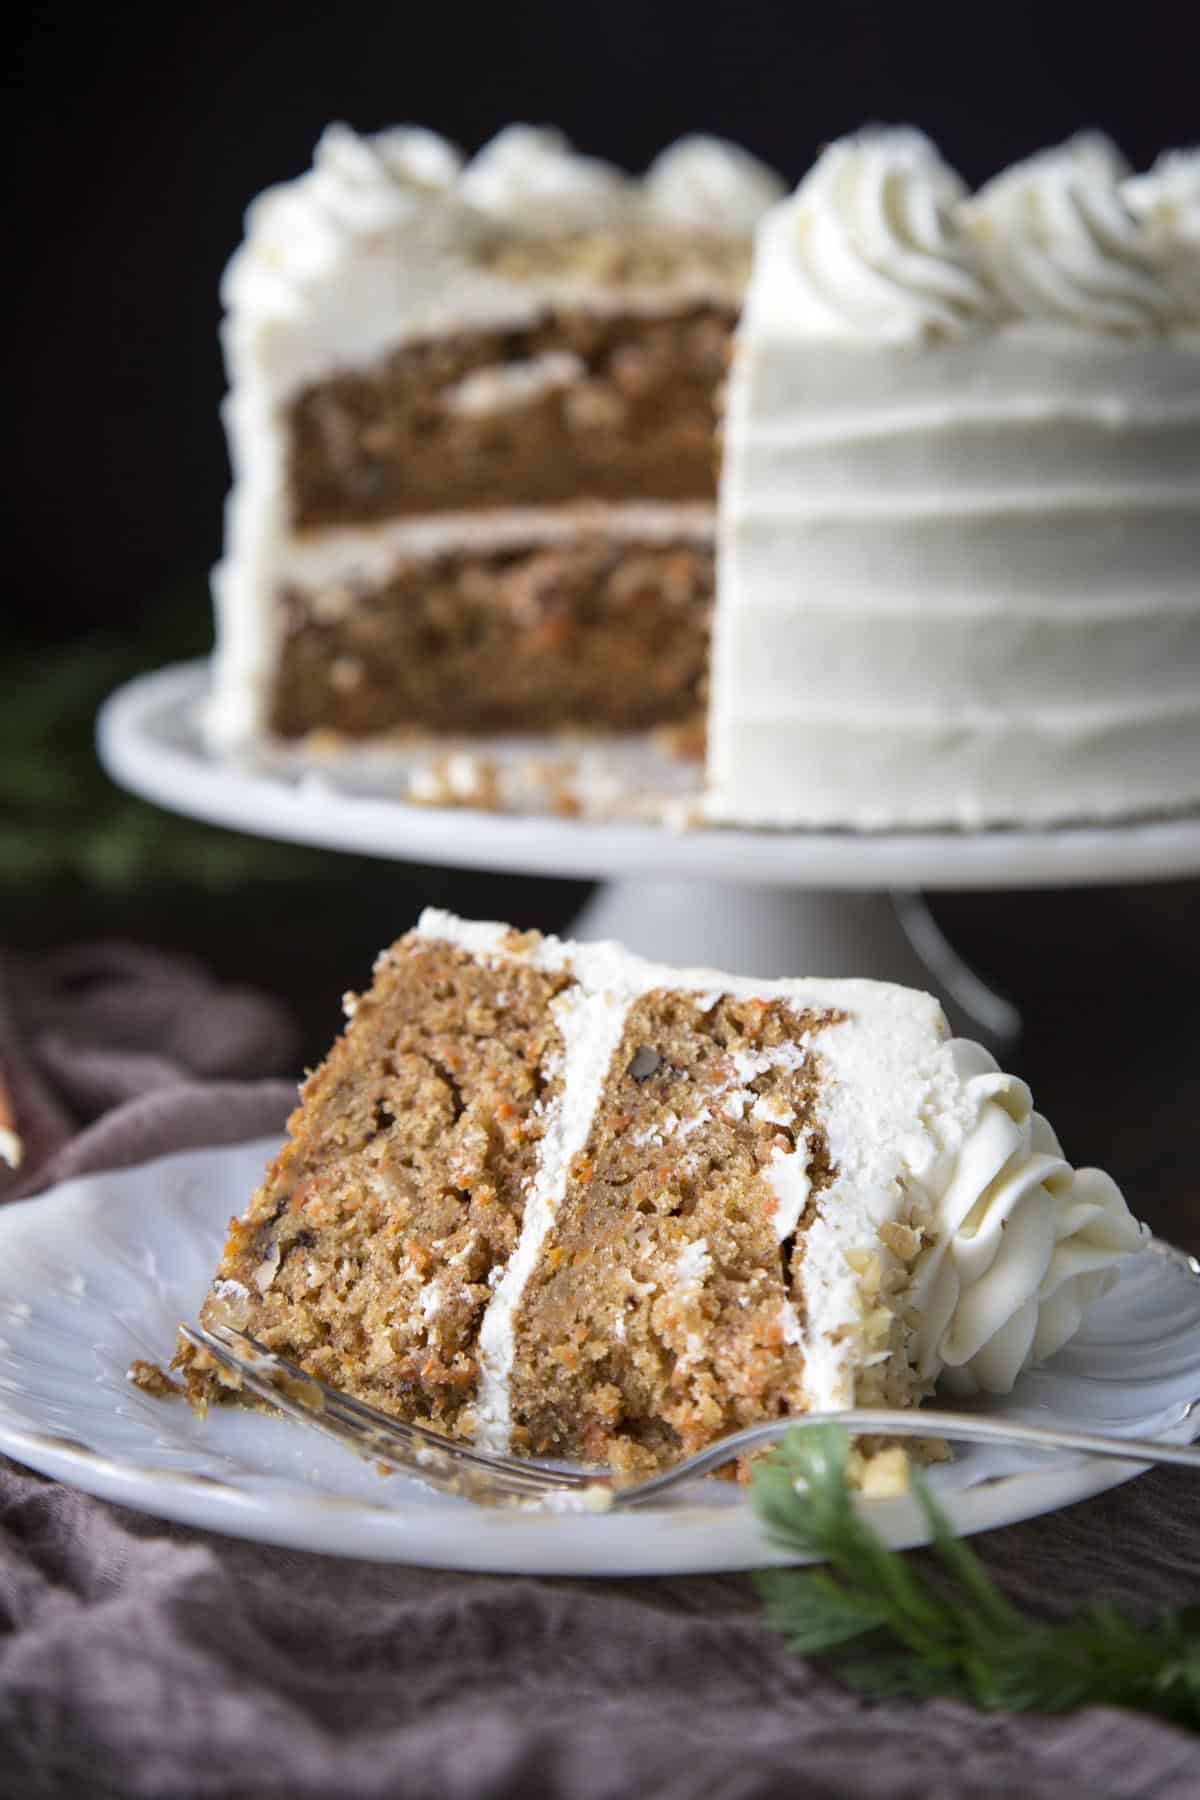 A slice of carrot cake on a plate with the rest of the cake in the back.